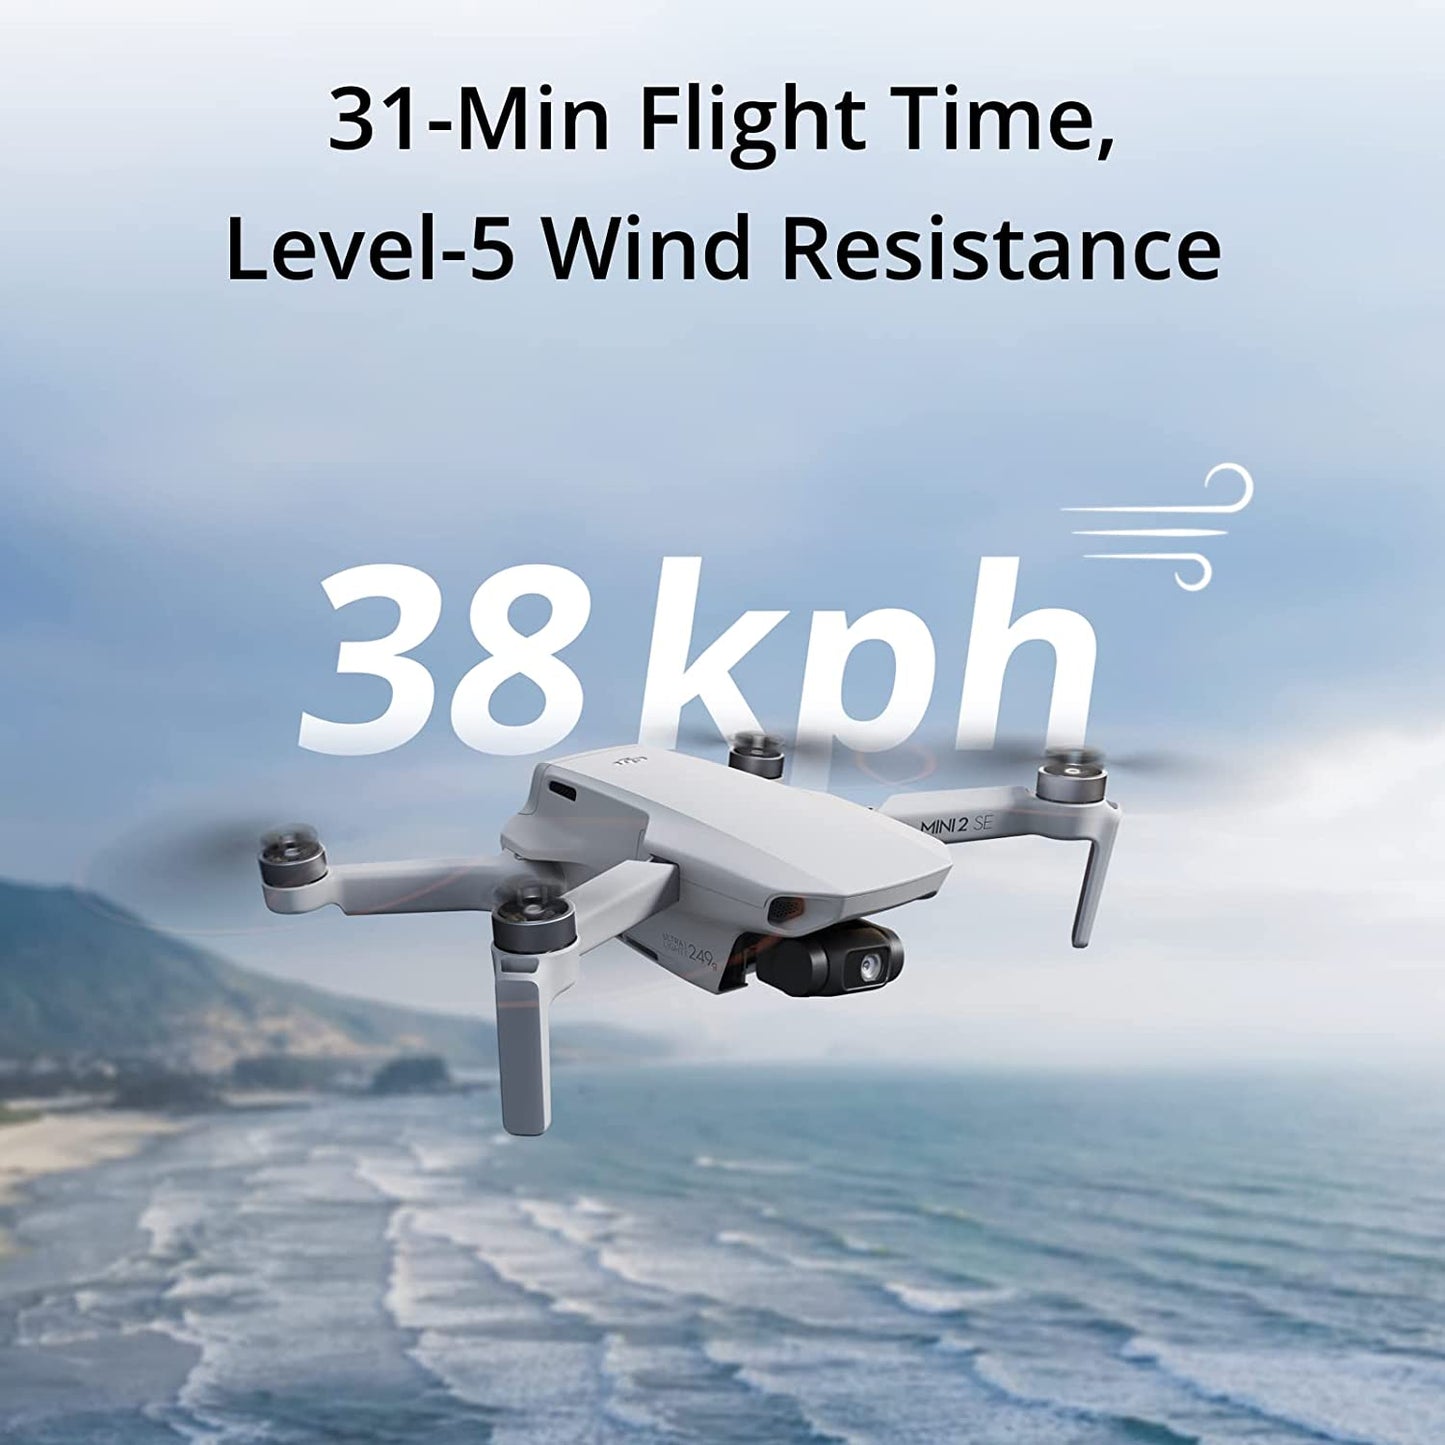 Mini 2 SE Fly More Combo, Lightweight Drone with QHD Video, 10Km Video Transmission, 3 Batteries for Total of 93 Mins Flight Time, under 249 G, Automatic Pro Shots, Camera Drone for Beginners